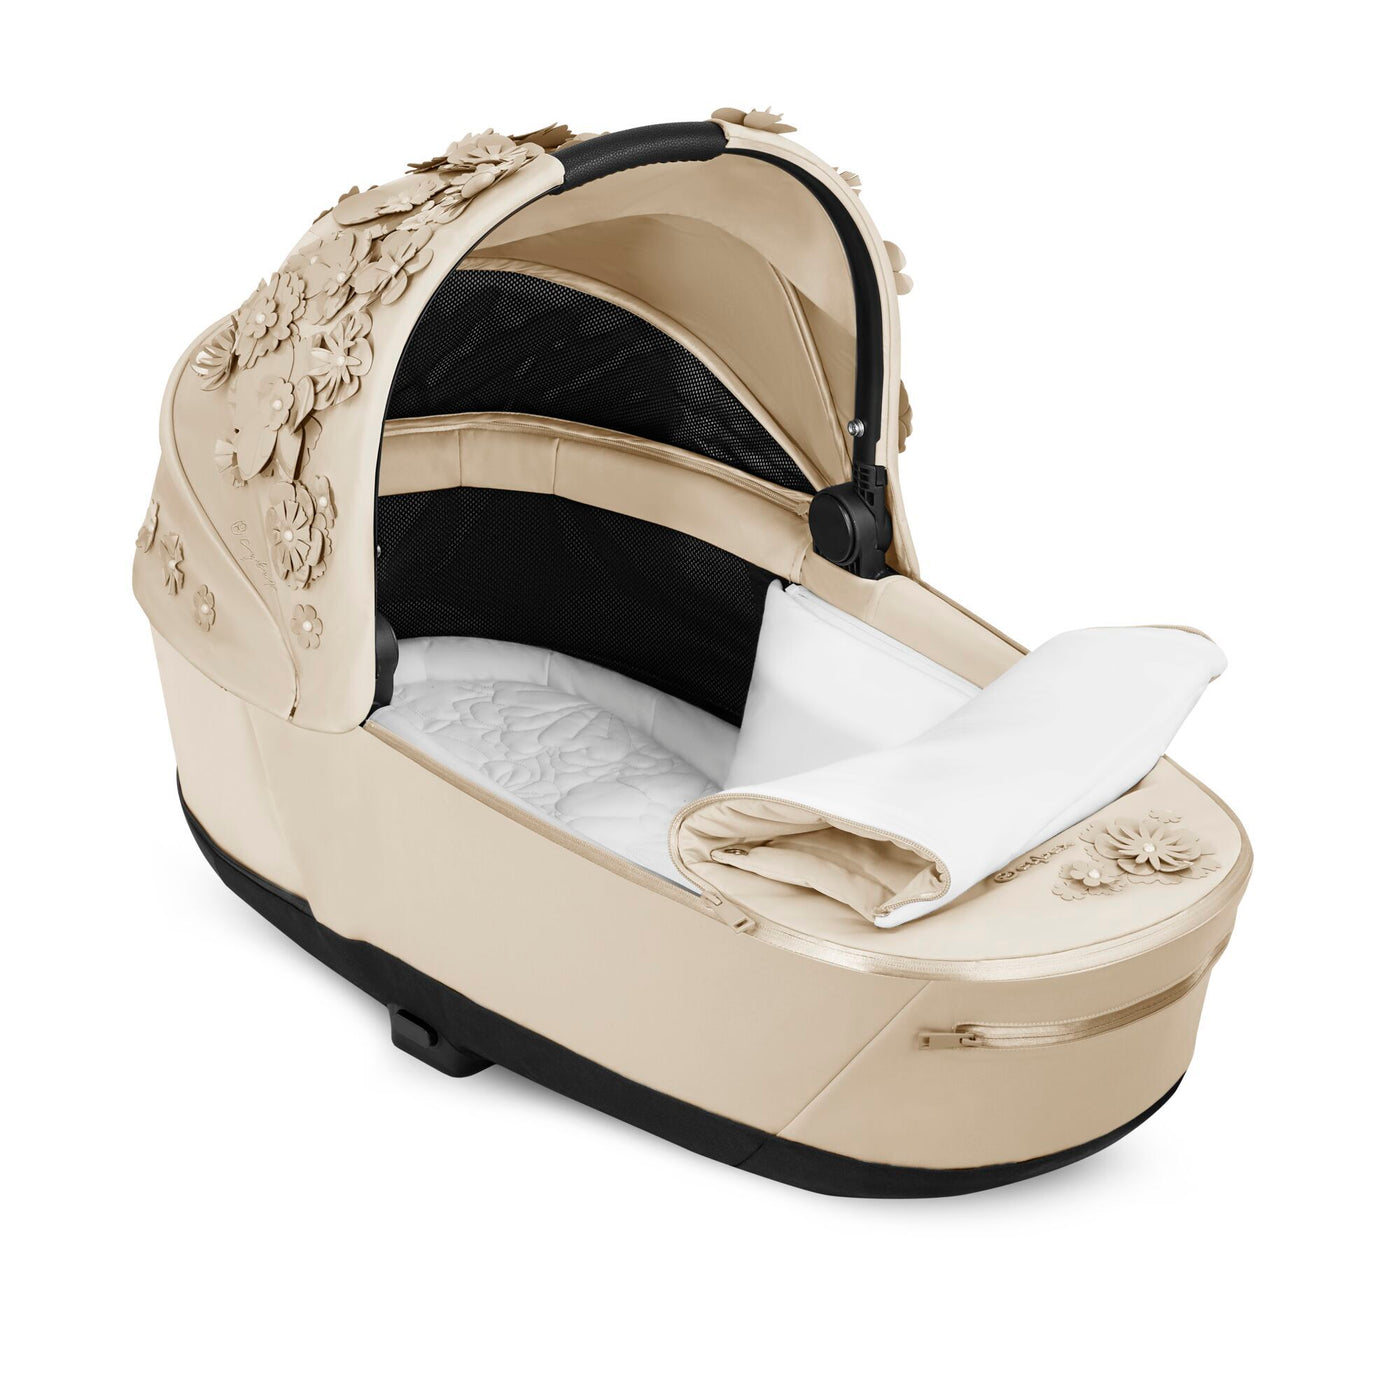 Cybex Priam Lux CarryCot - Simply Flowers Beige